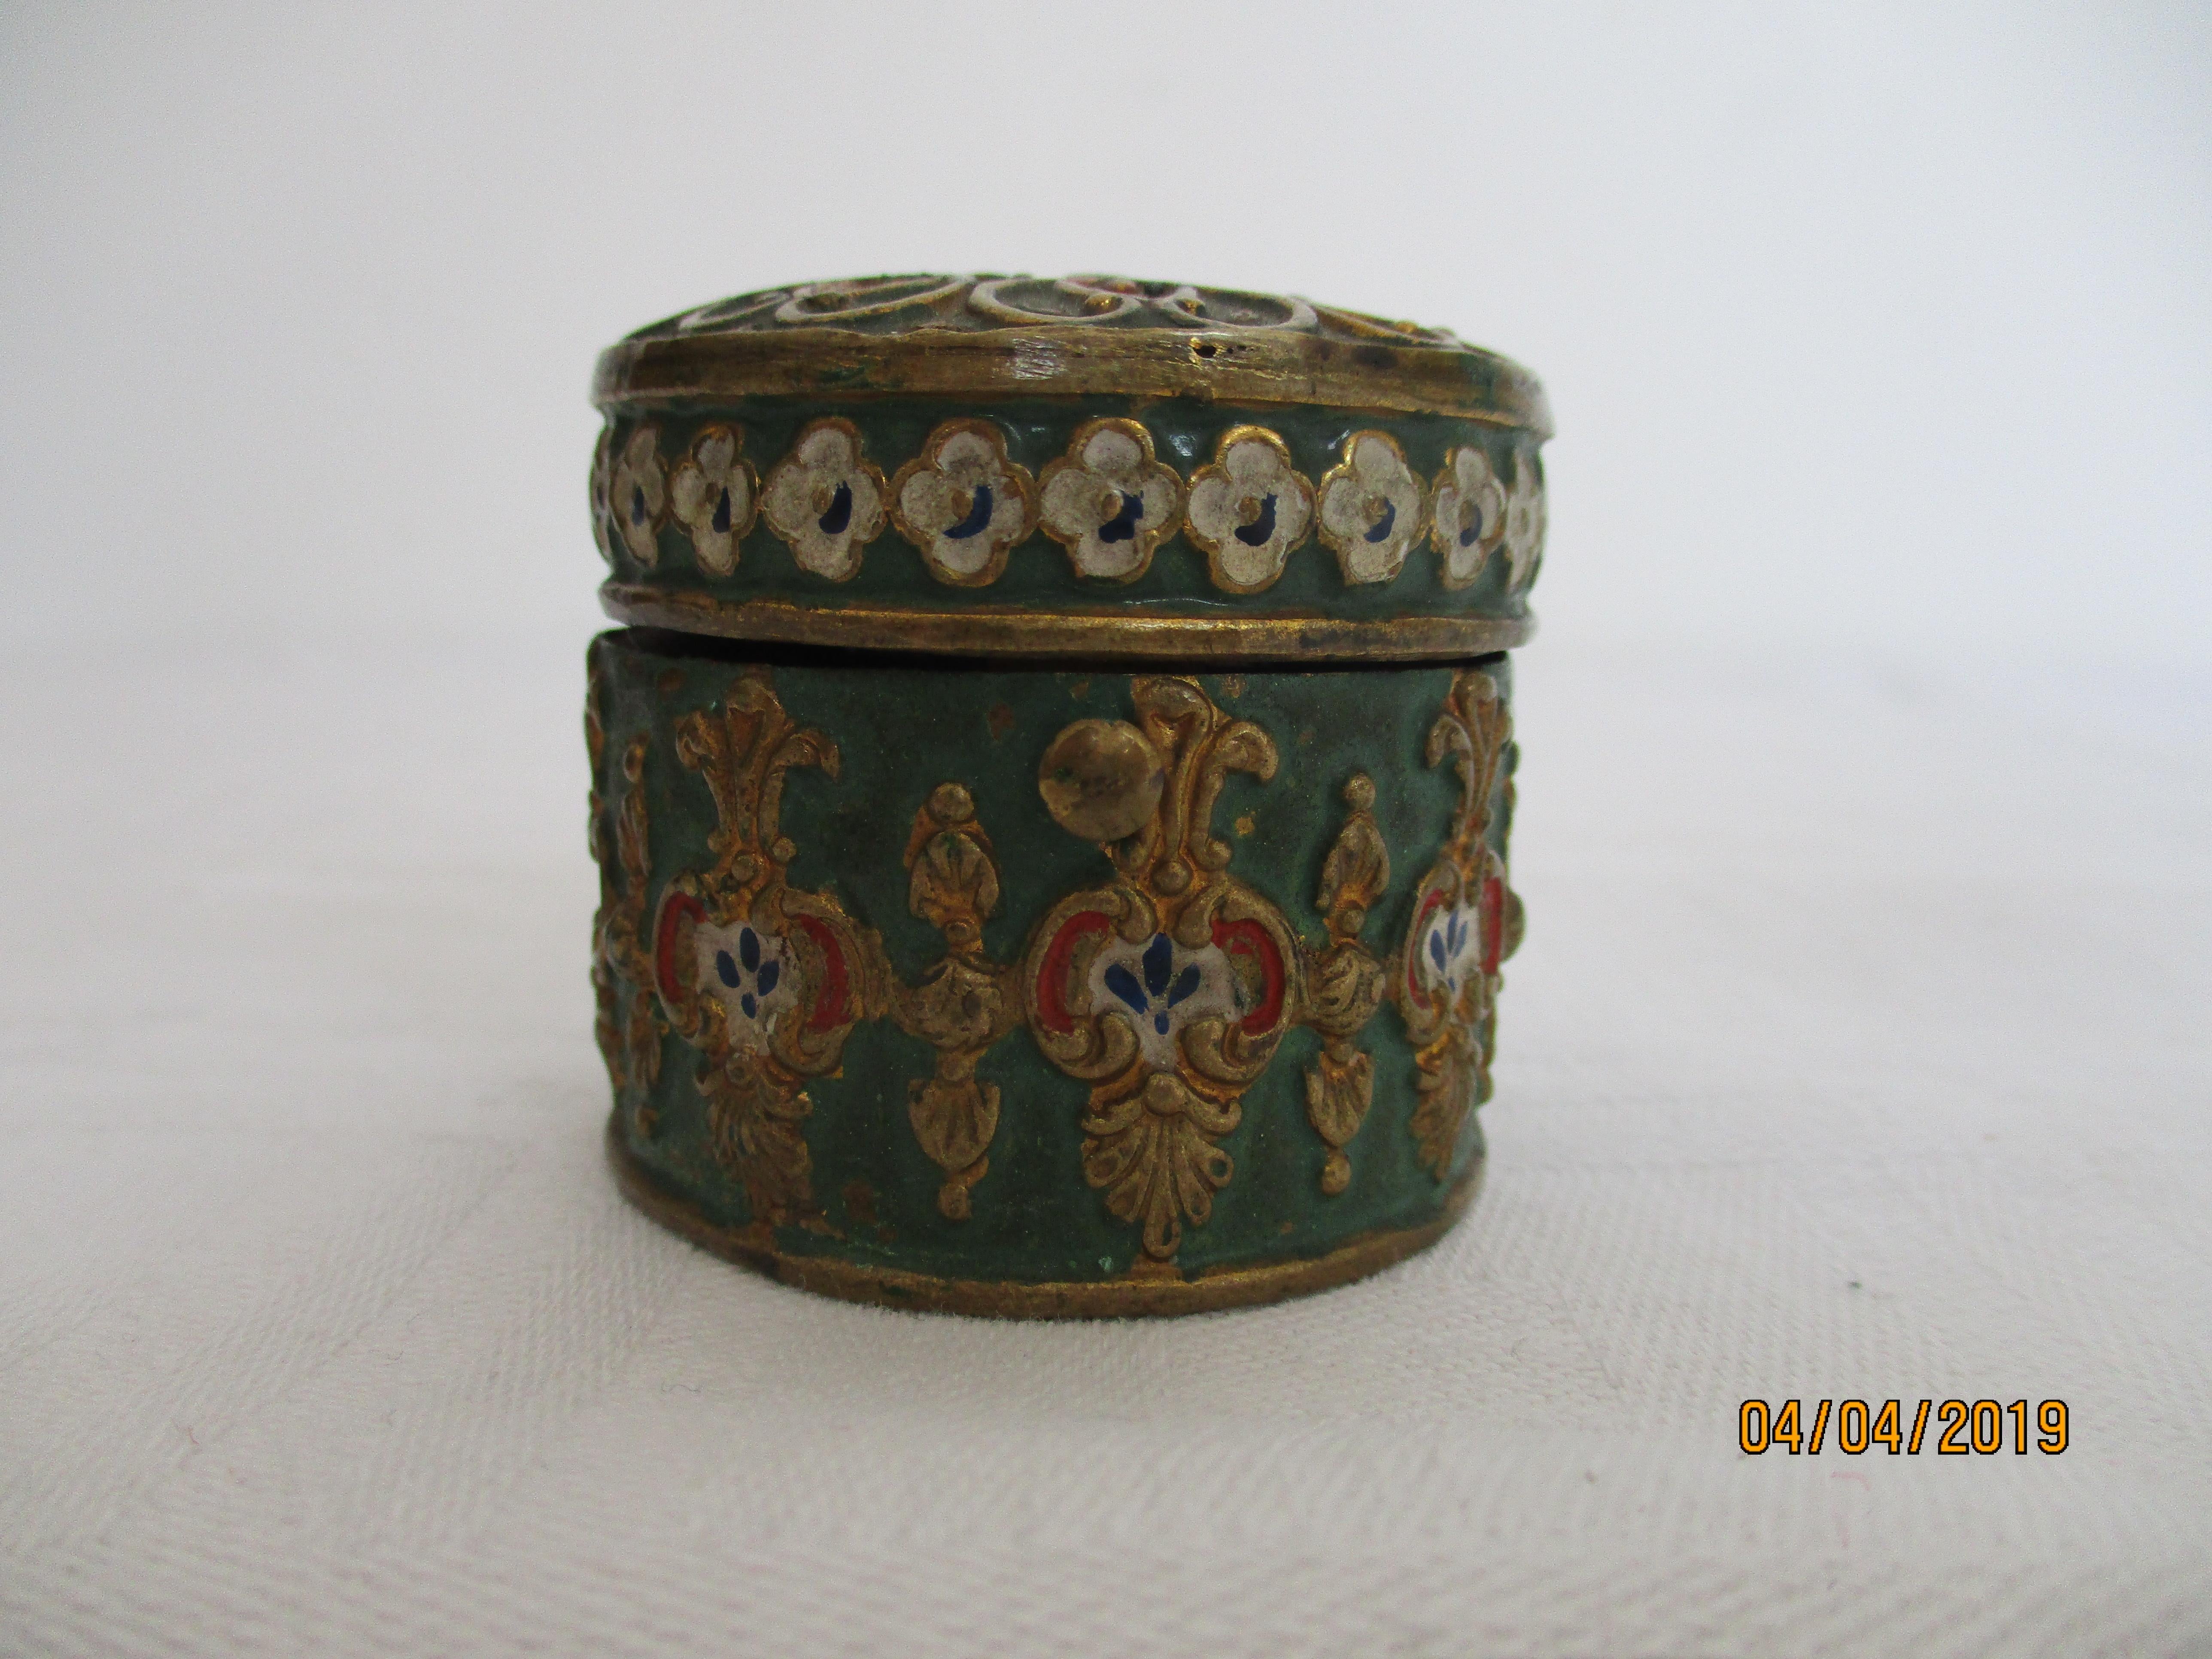 This inkwell comprises a base and hinged cover. The base is elaborately decorated with red, gold, blue and white against a green background. 
The inside of the inkwell is colored red. 
The condition is good with only minor losses to the cloisonne.